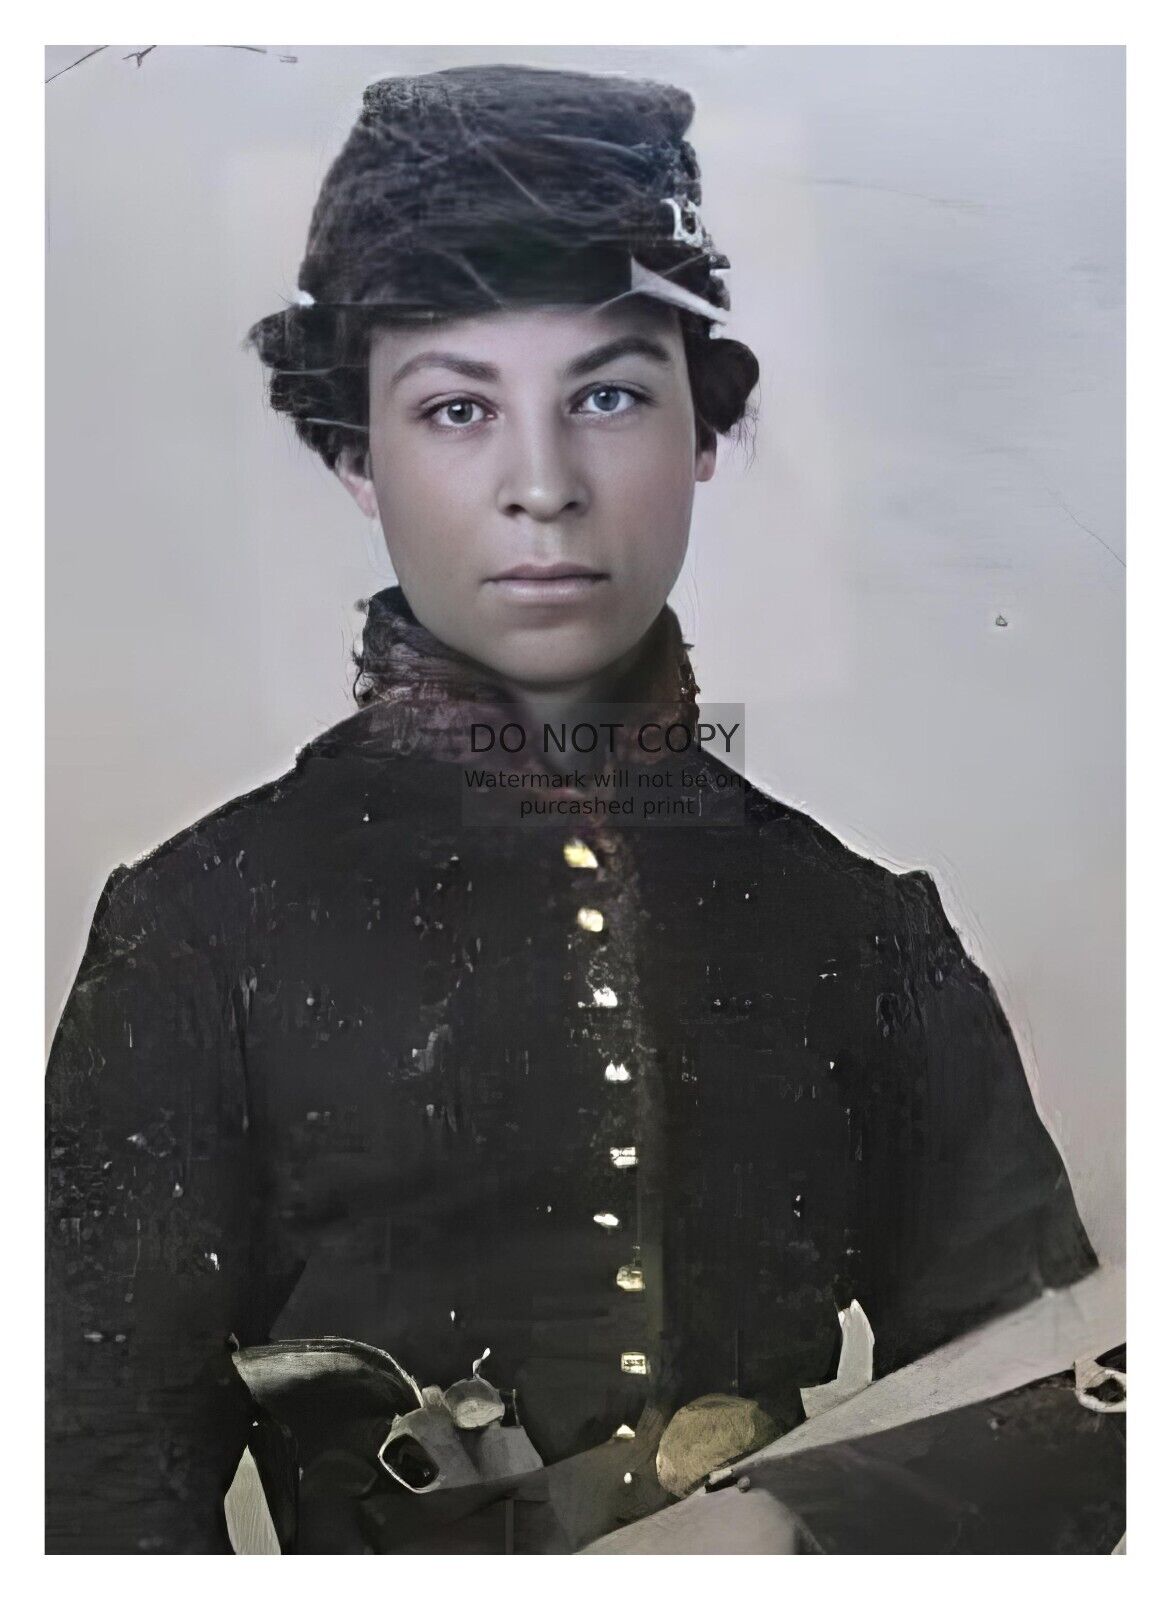 CATHAY WILLIAMS ONLY FEMALE BUFFALO SOLDIER UNION CIVIL WAR 5X7 COLORIZED PHOTO